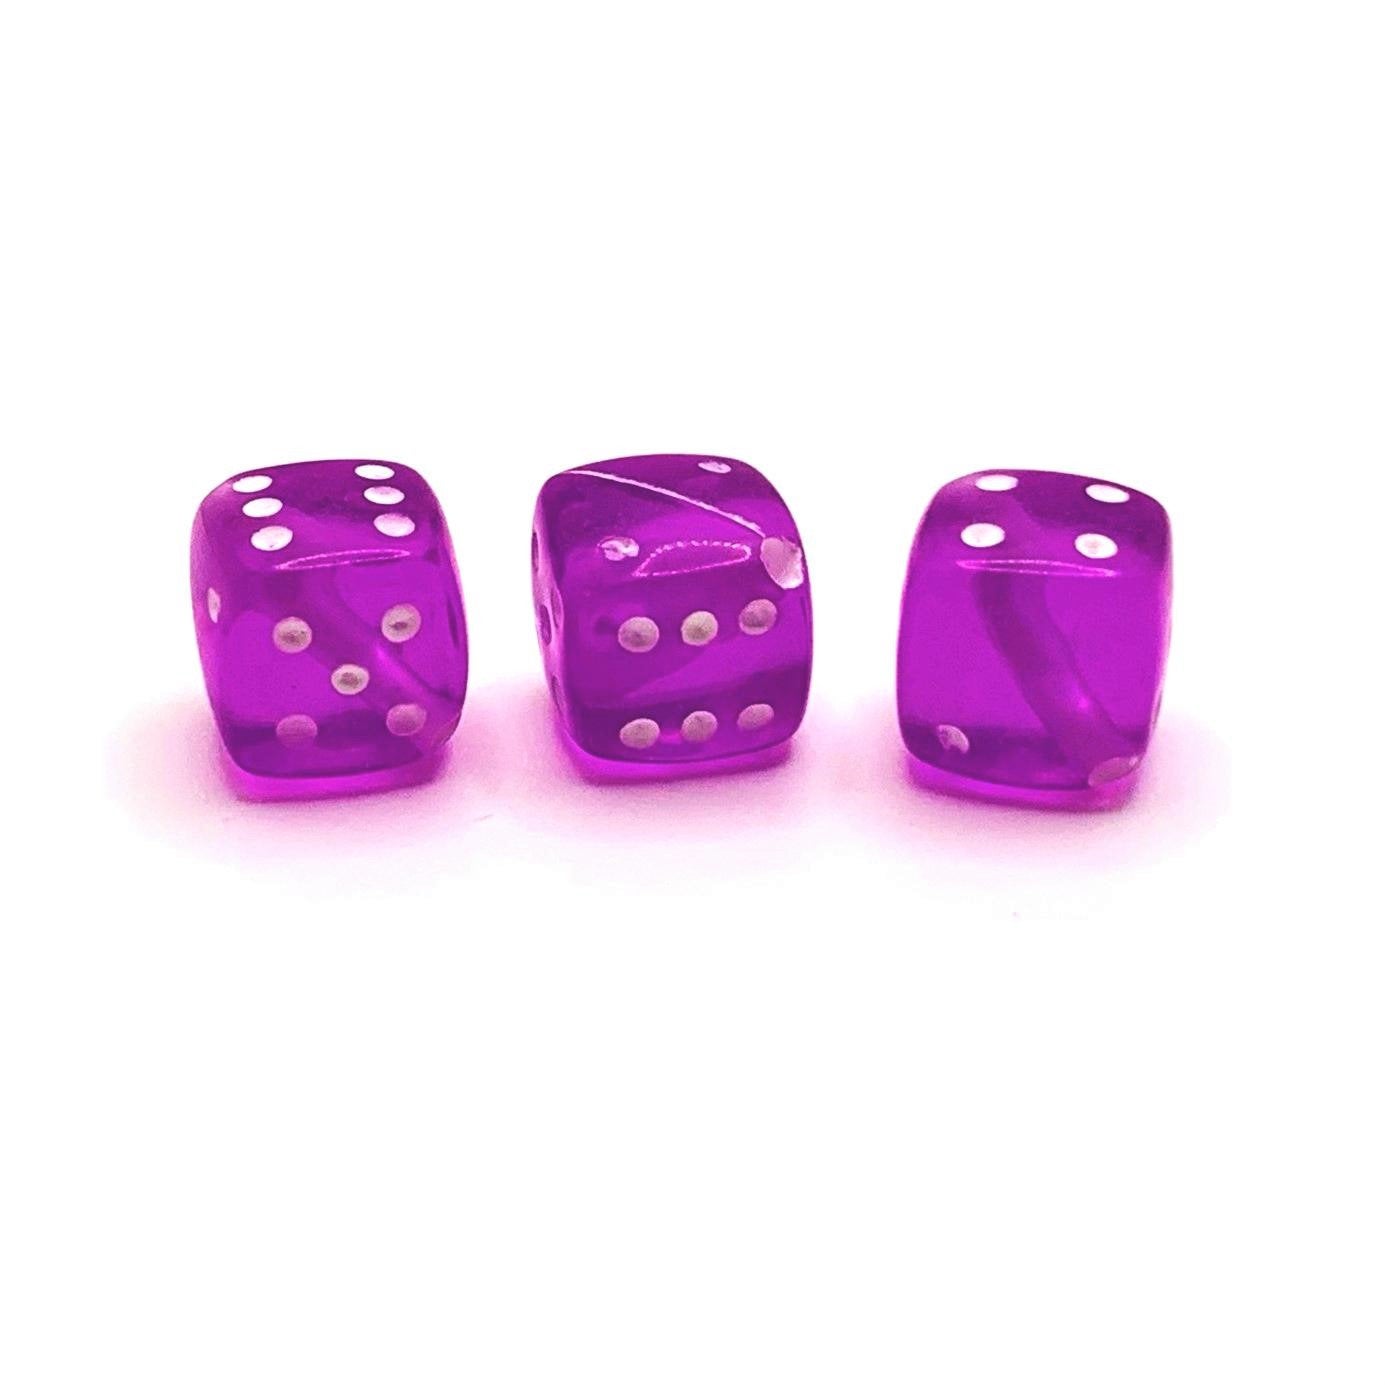 4, 20 or 50 Pieces: Purple Dice Spacer Beads